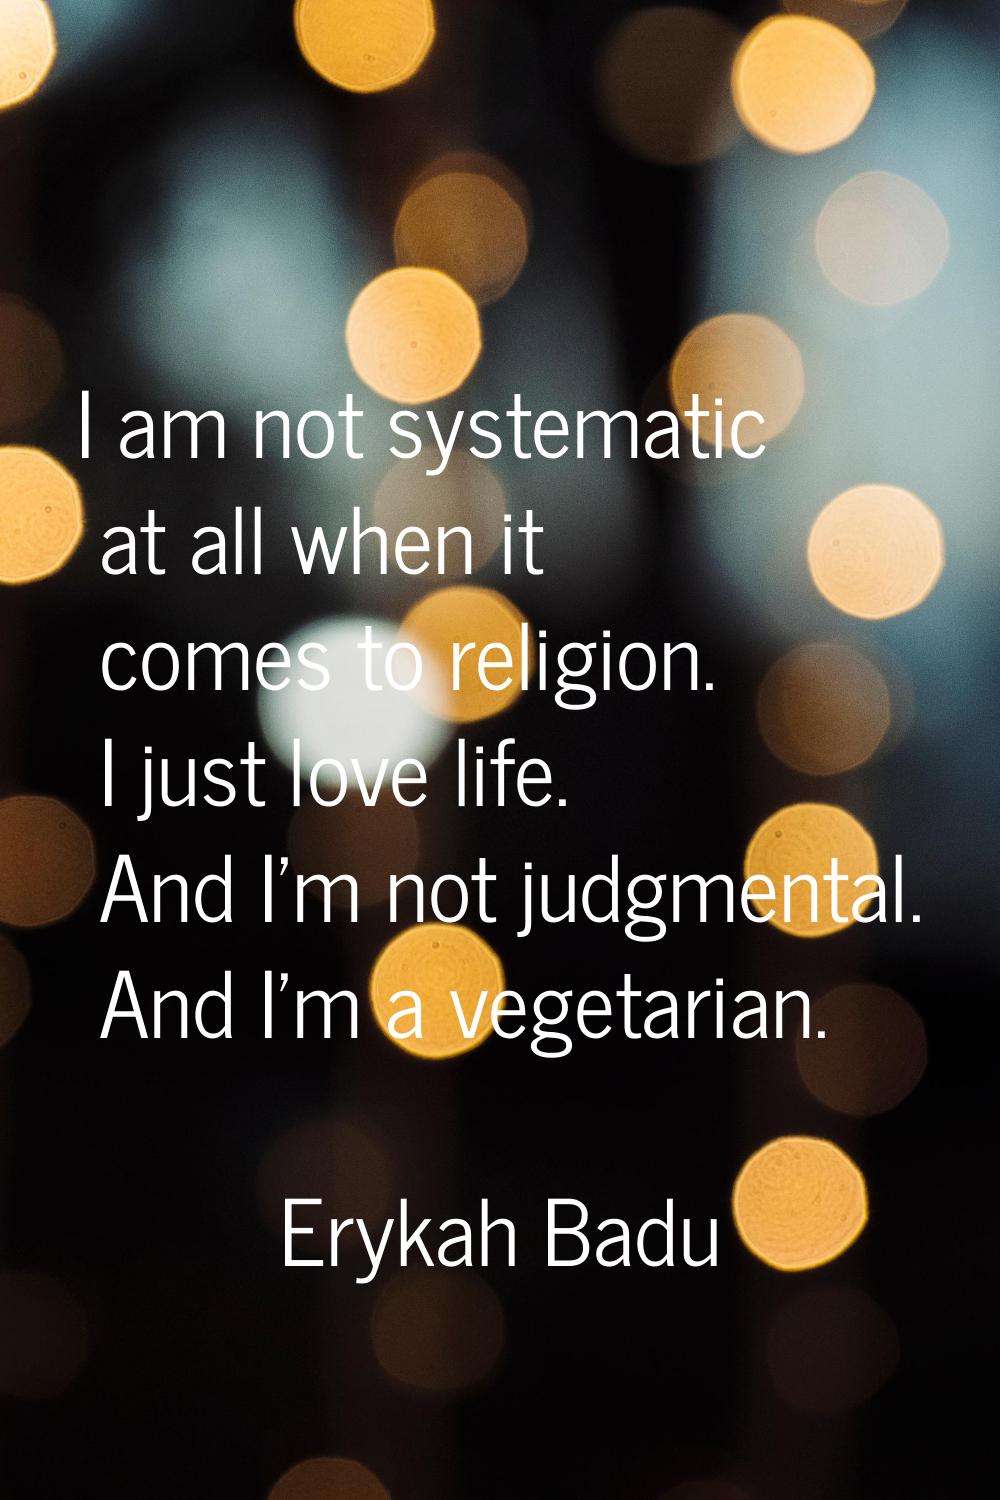 I am not systematic at all when it comes to religion. I just love life. And I'm not judgmental. And